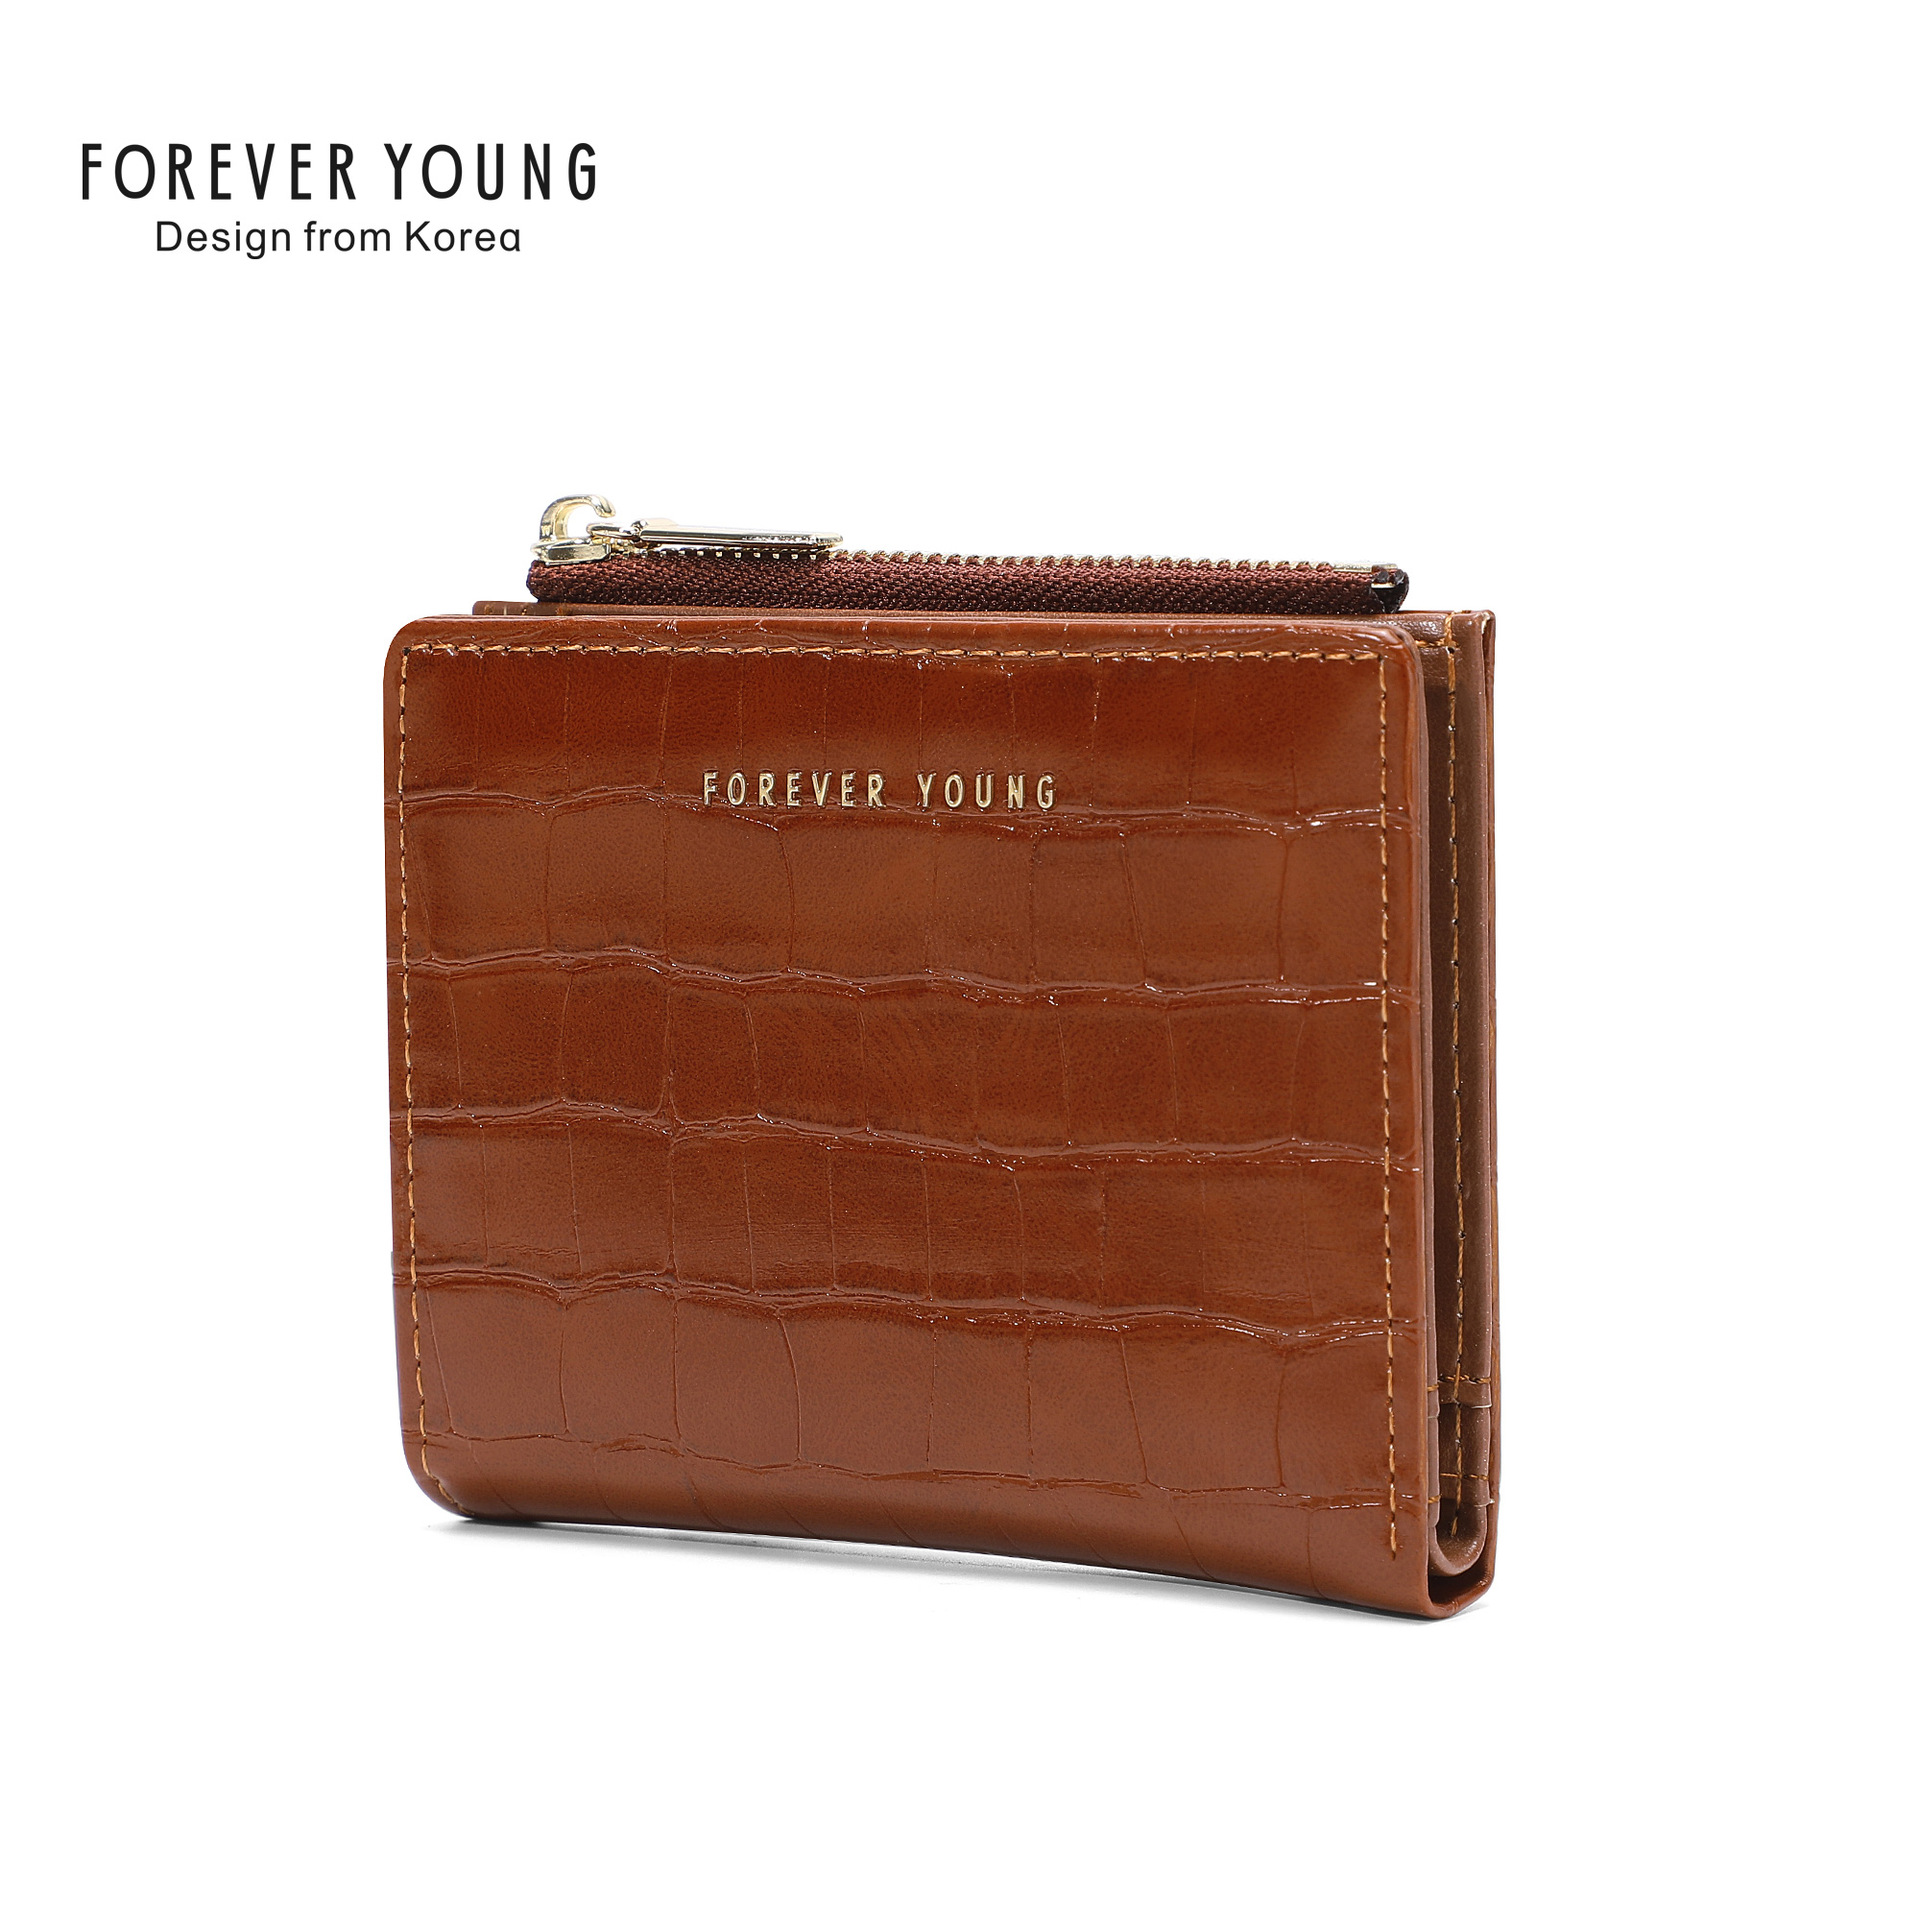 Forever Young Bag Wallet Women's Short Coin Purse Niche Women Bag Wholesale Simple Ultra-Thin Card Holder